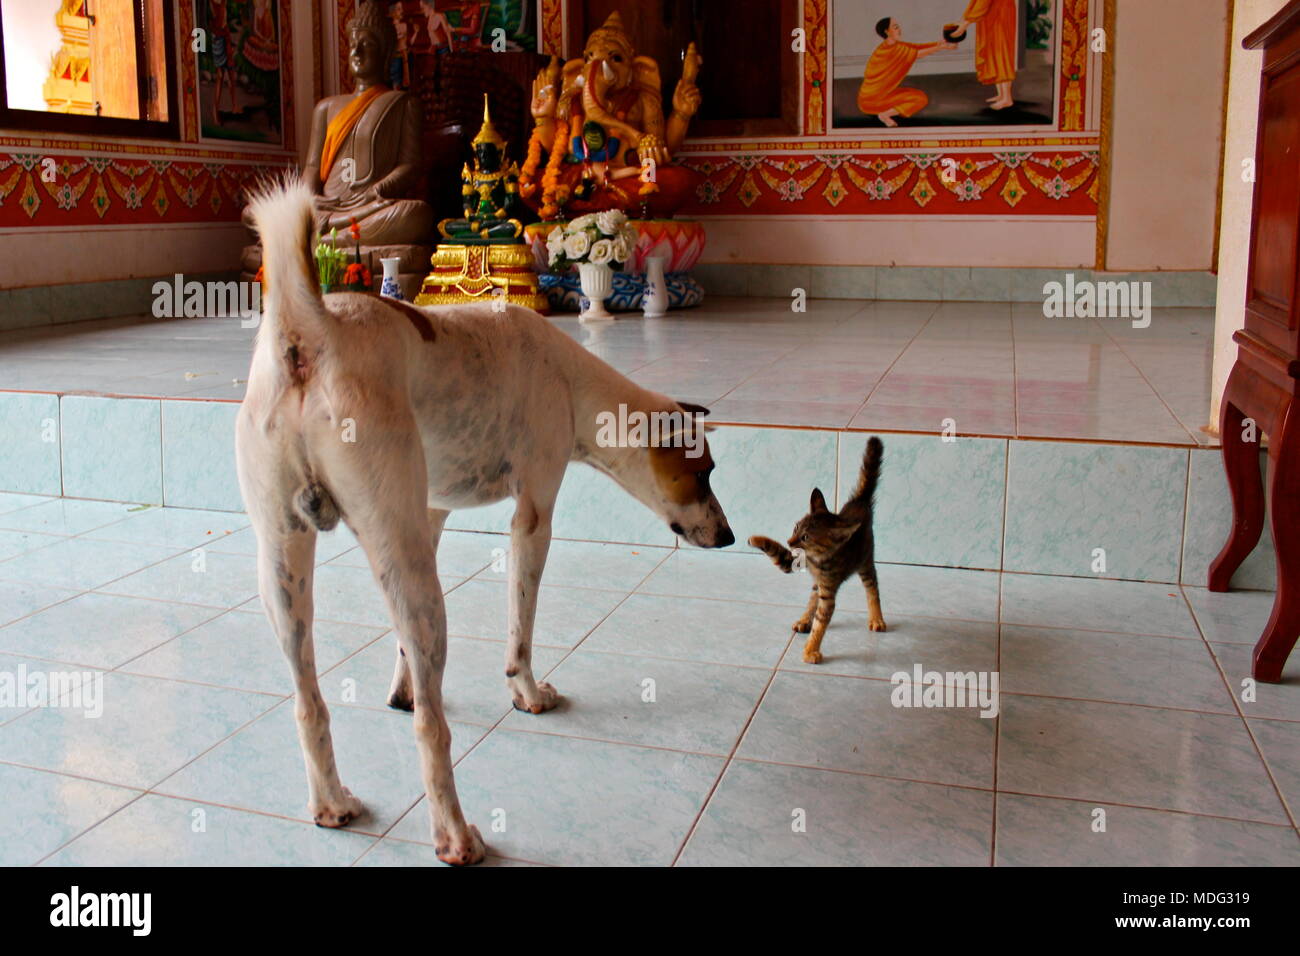 Temple dog and cat get into a spat on the grounds of Pha That Luang. Vientiane, Laos, 2015. Stock Photo